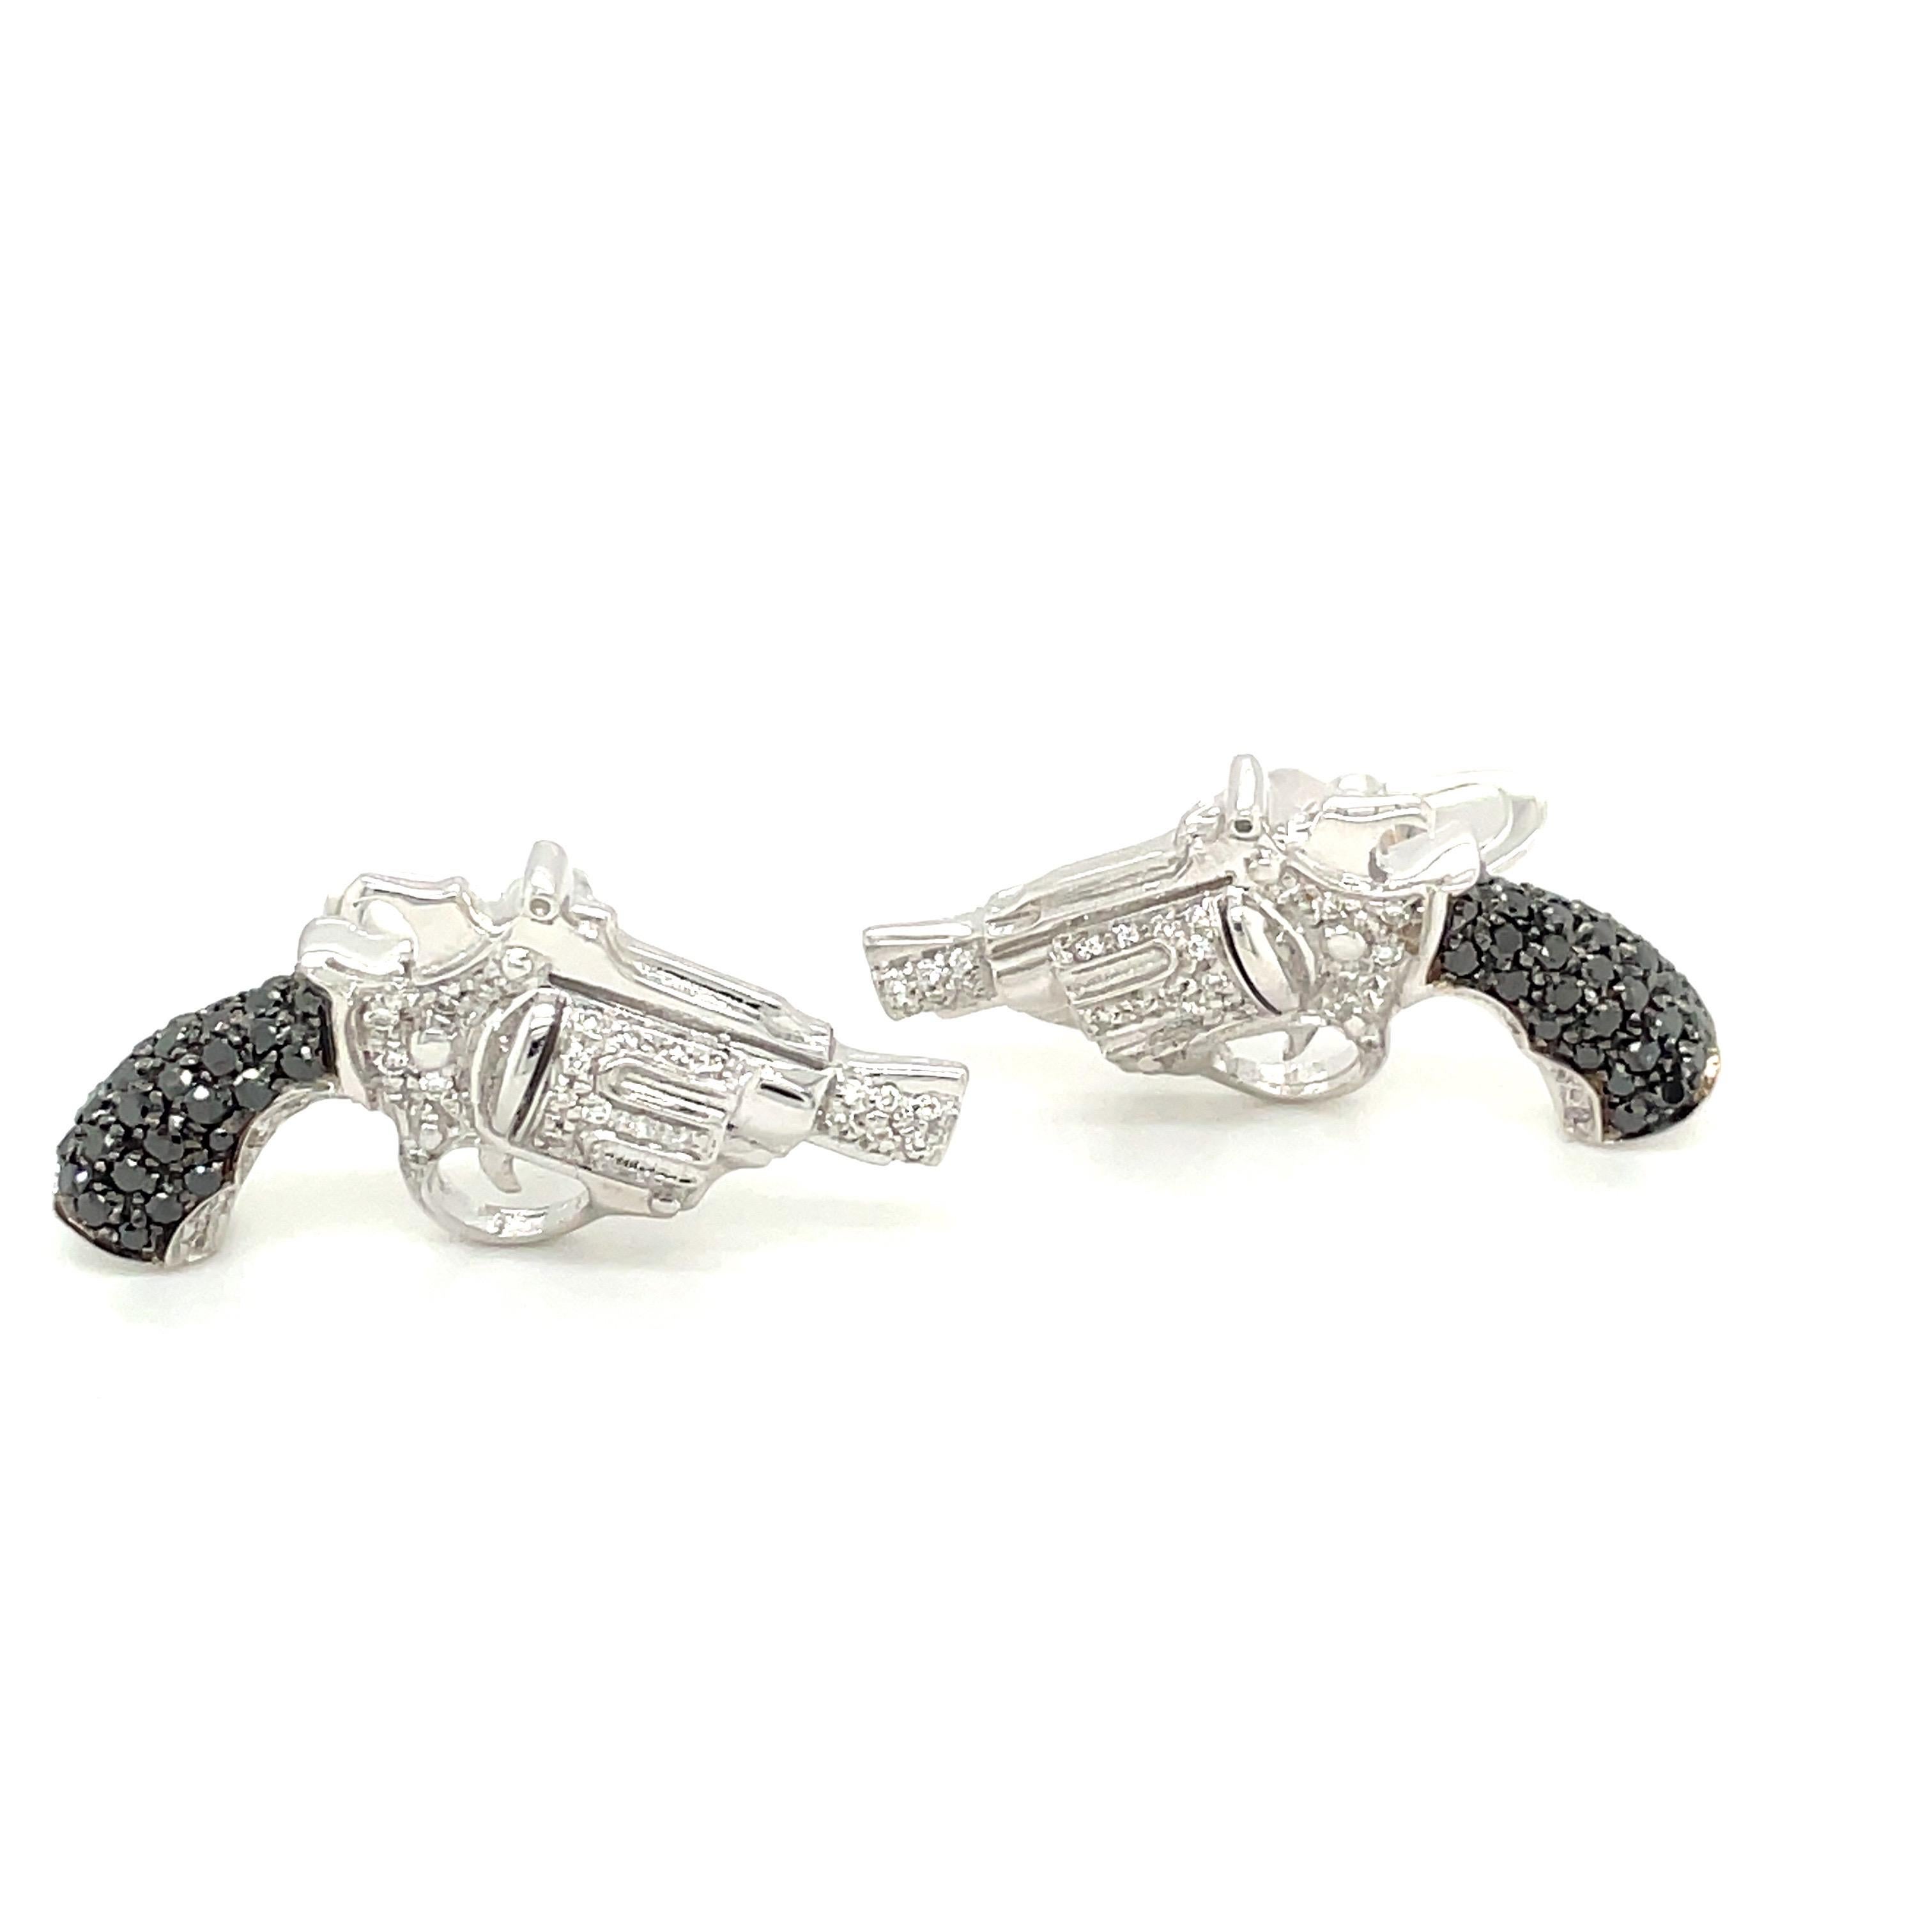 Adolfo Courrier 18kt White Gold Beretta Pistol Cuff Links Black & White Diamonds In New Condition For Sale In New York, NY